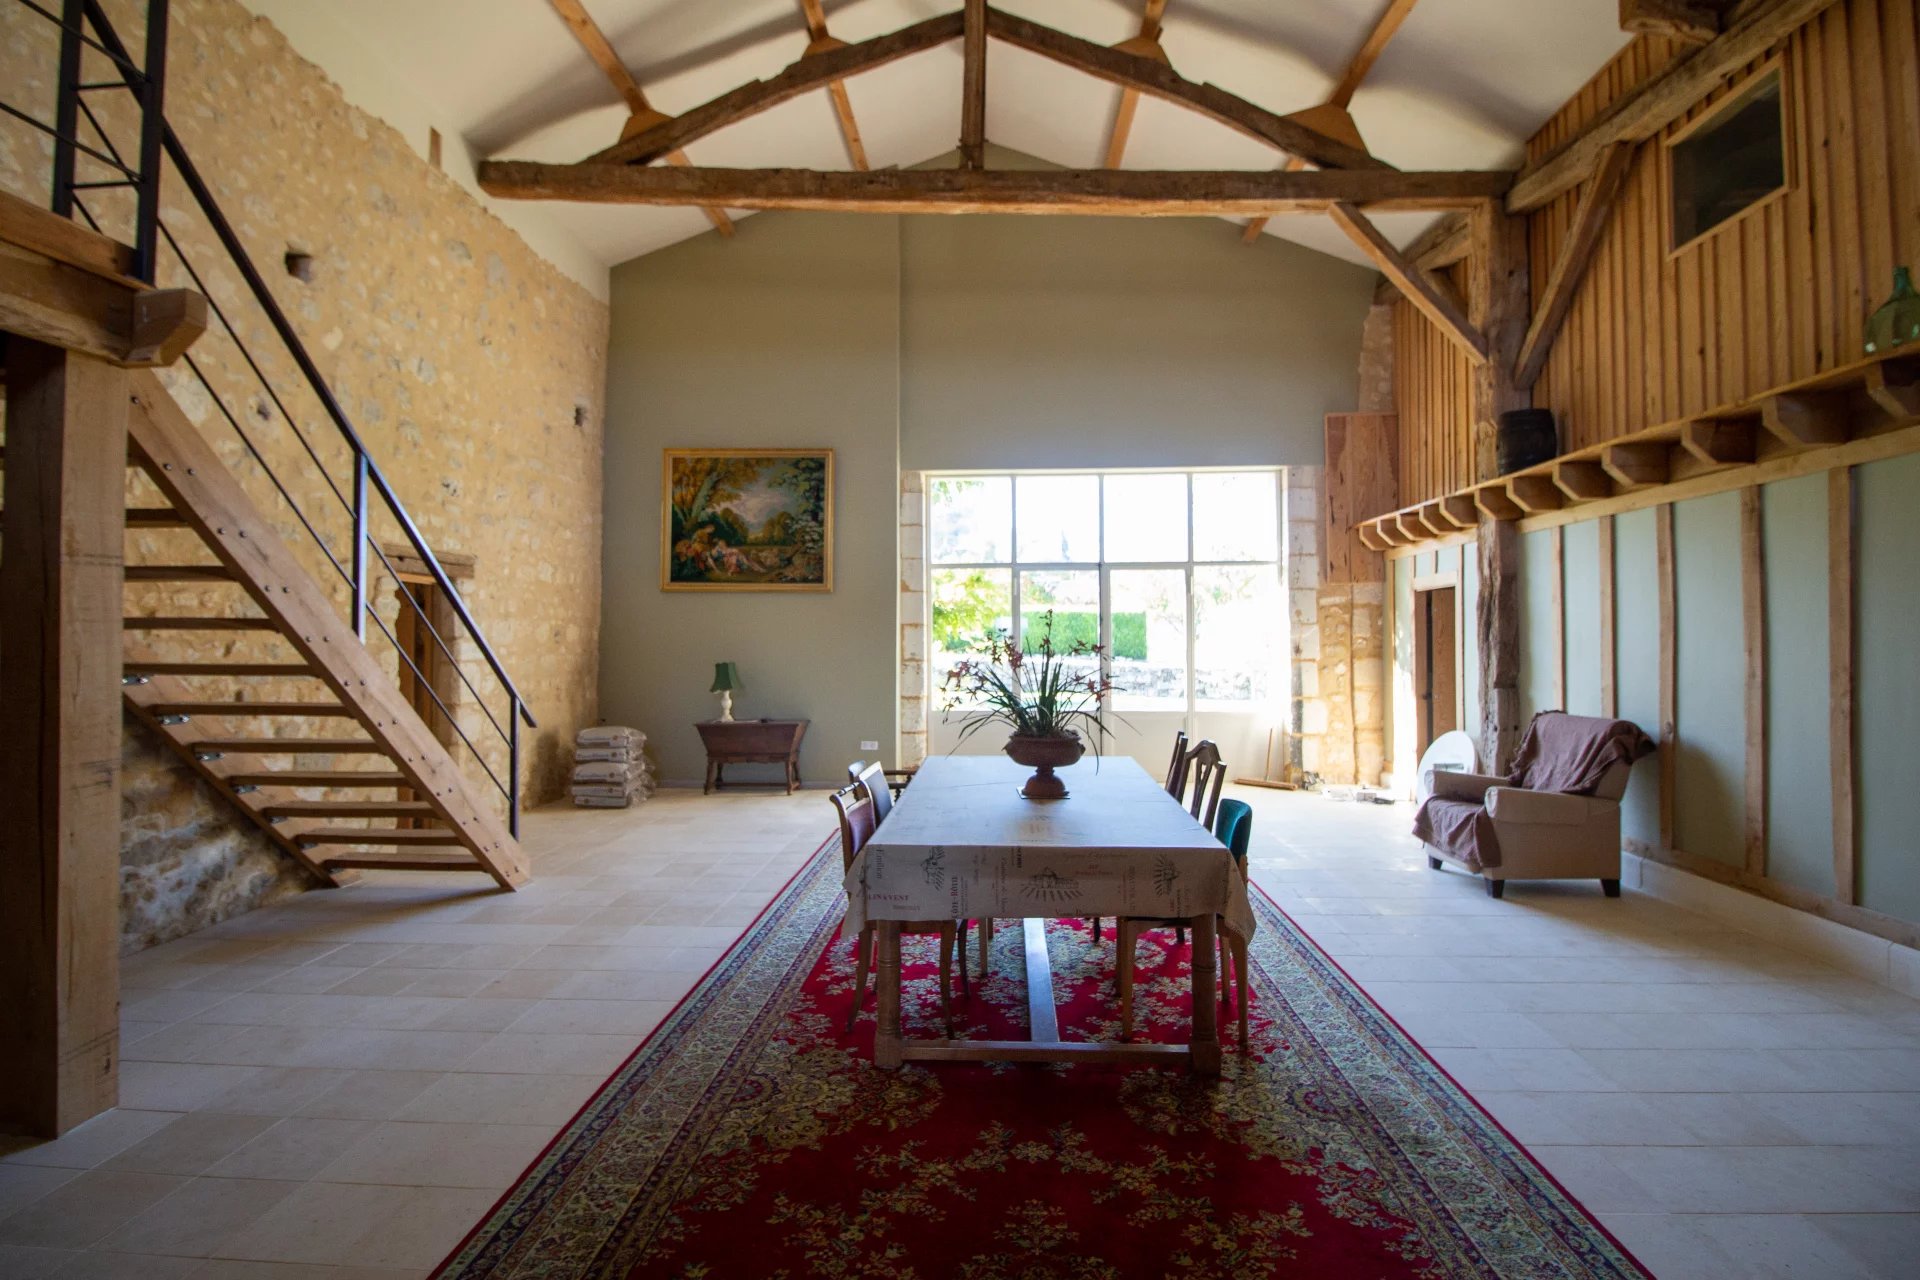 Stunning barn conversion on the edge of town